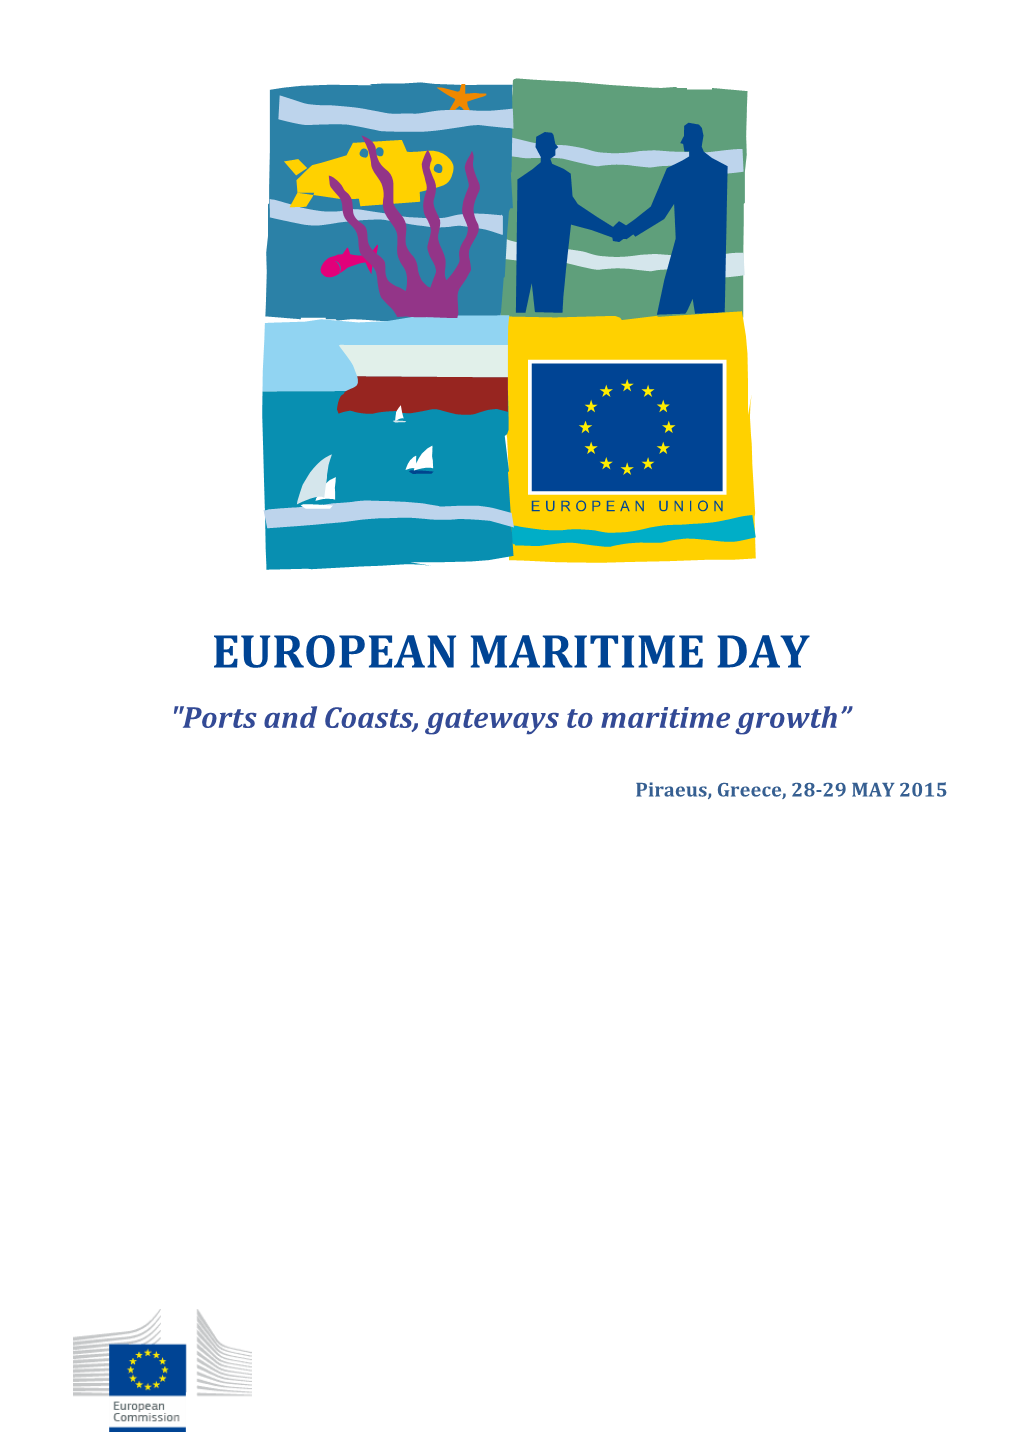 EUROPEAN MARITIME DAY "Ports and Coasts, Gateways to Maritime Growth”